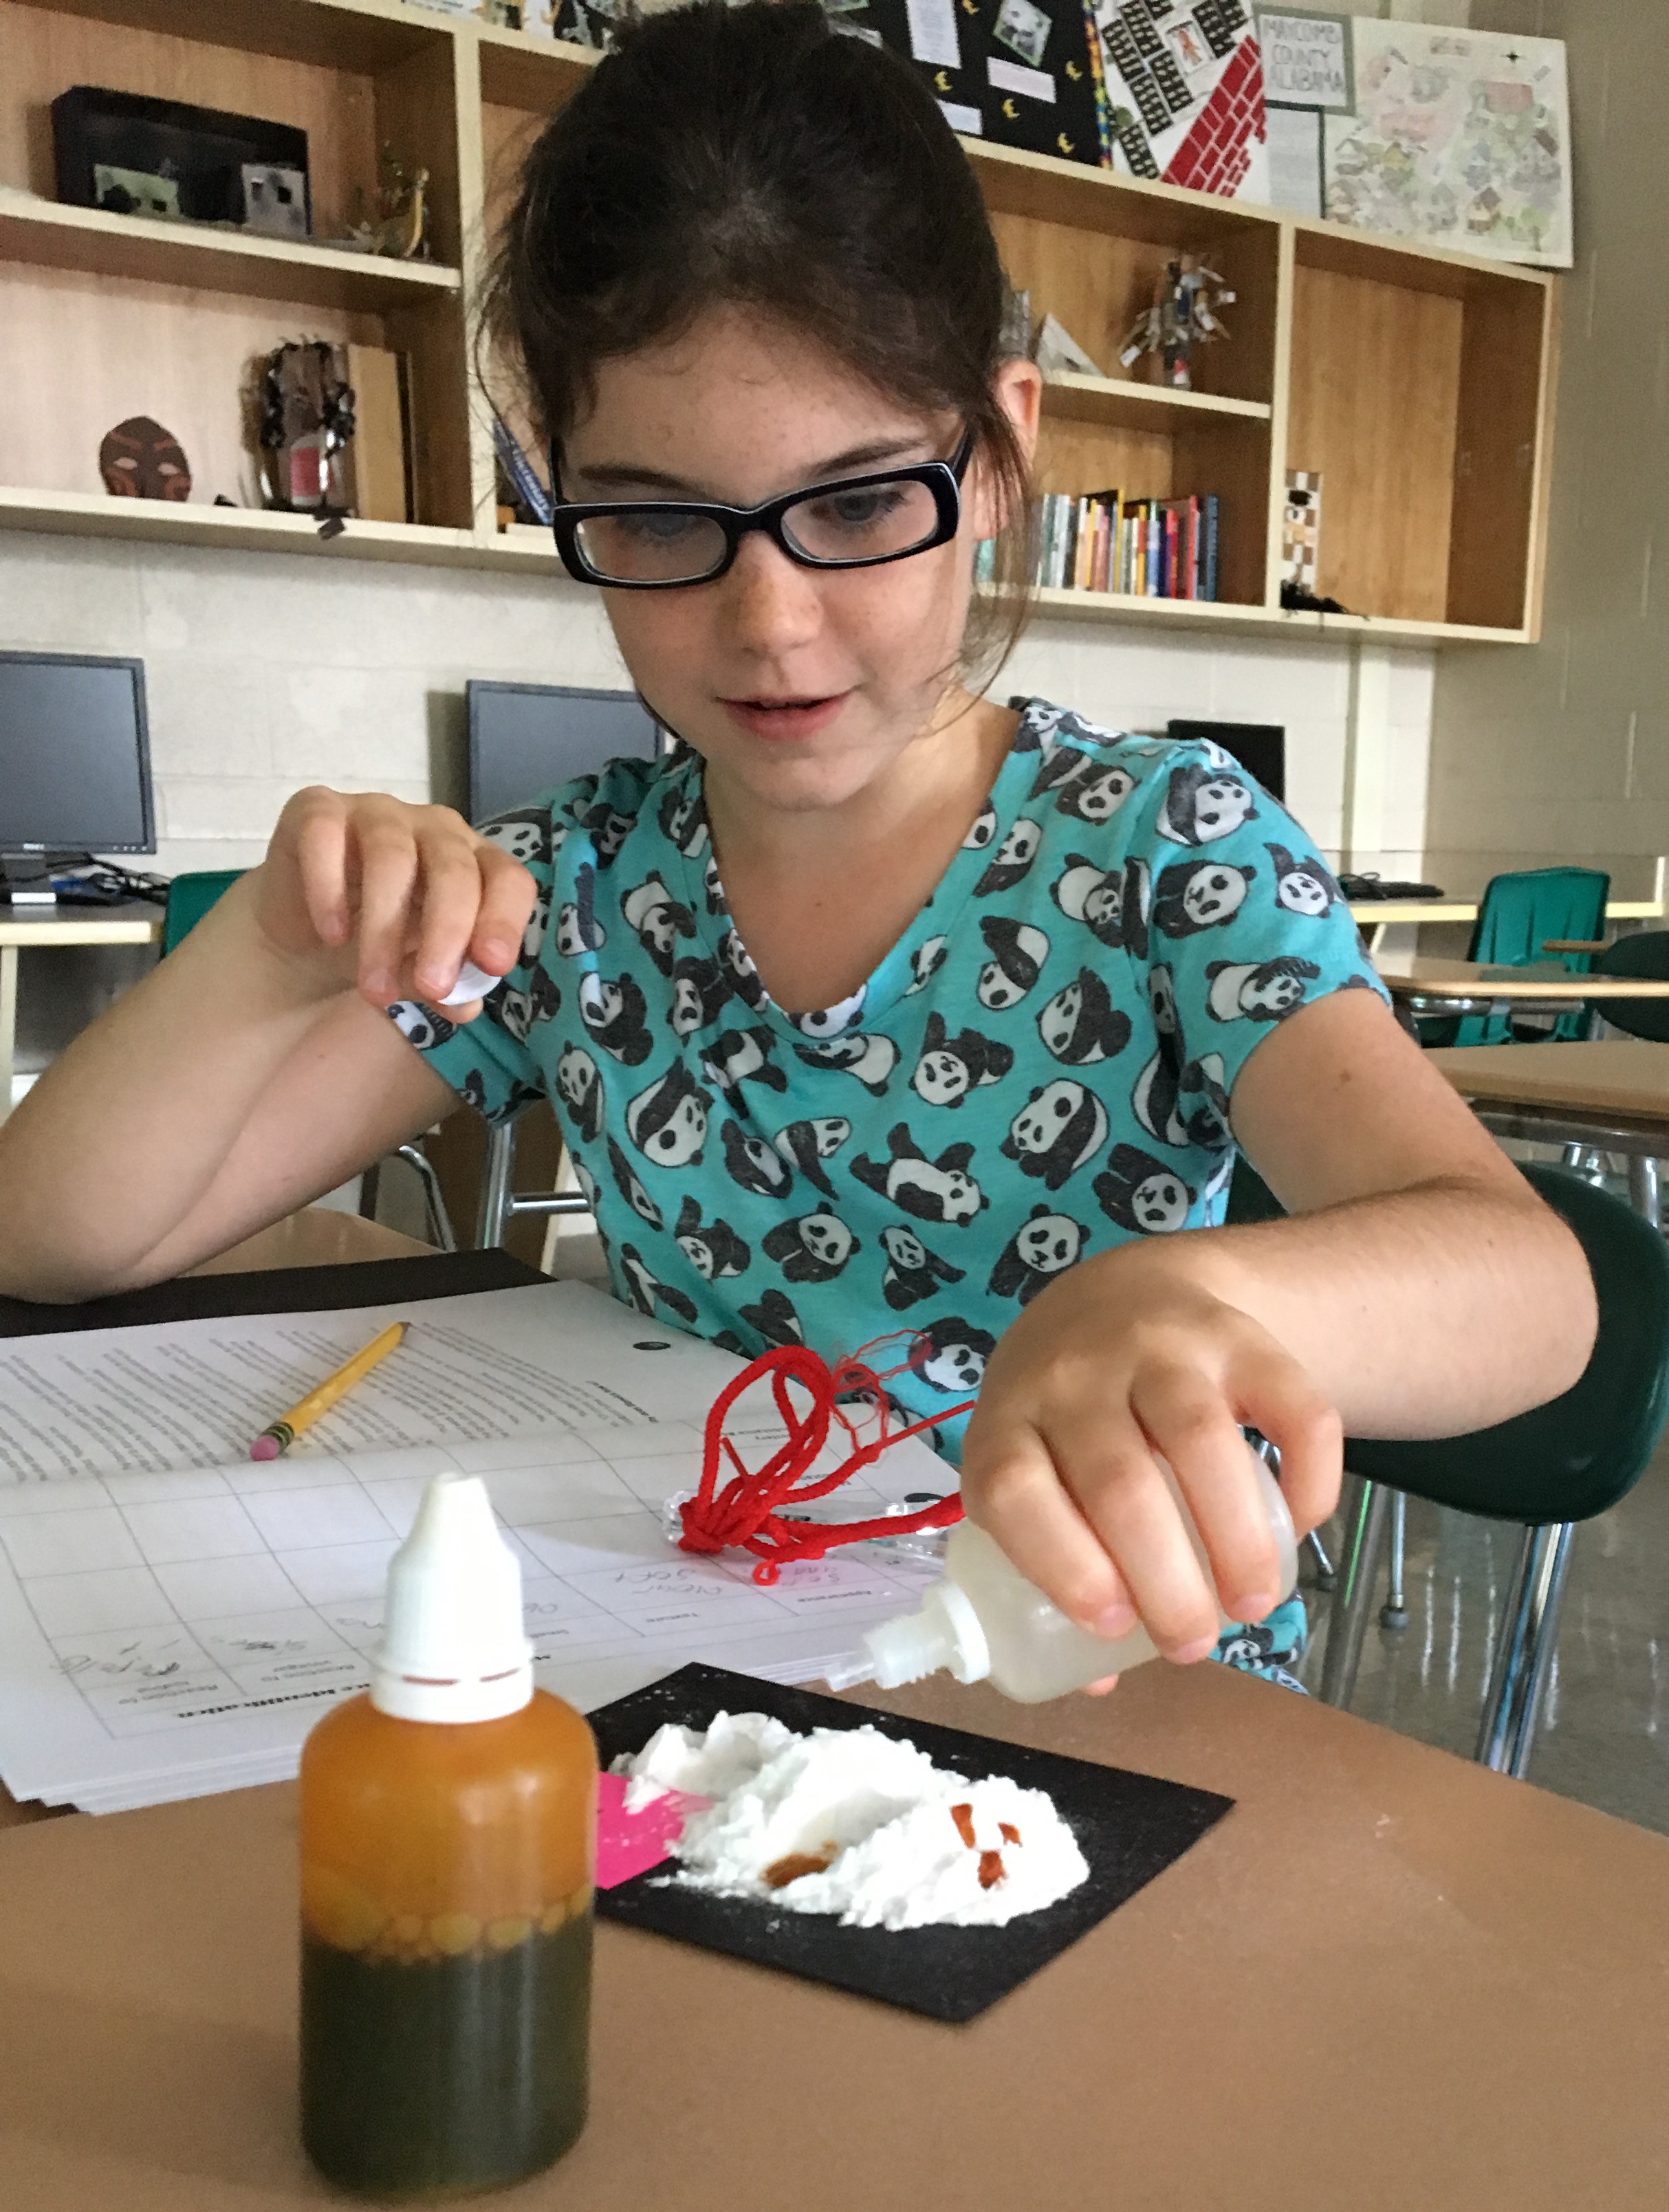 Youngster takes part in STEAM course sponsored by Downingtown Community Education Foundation